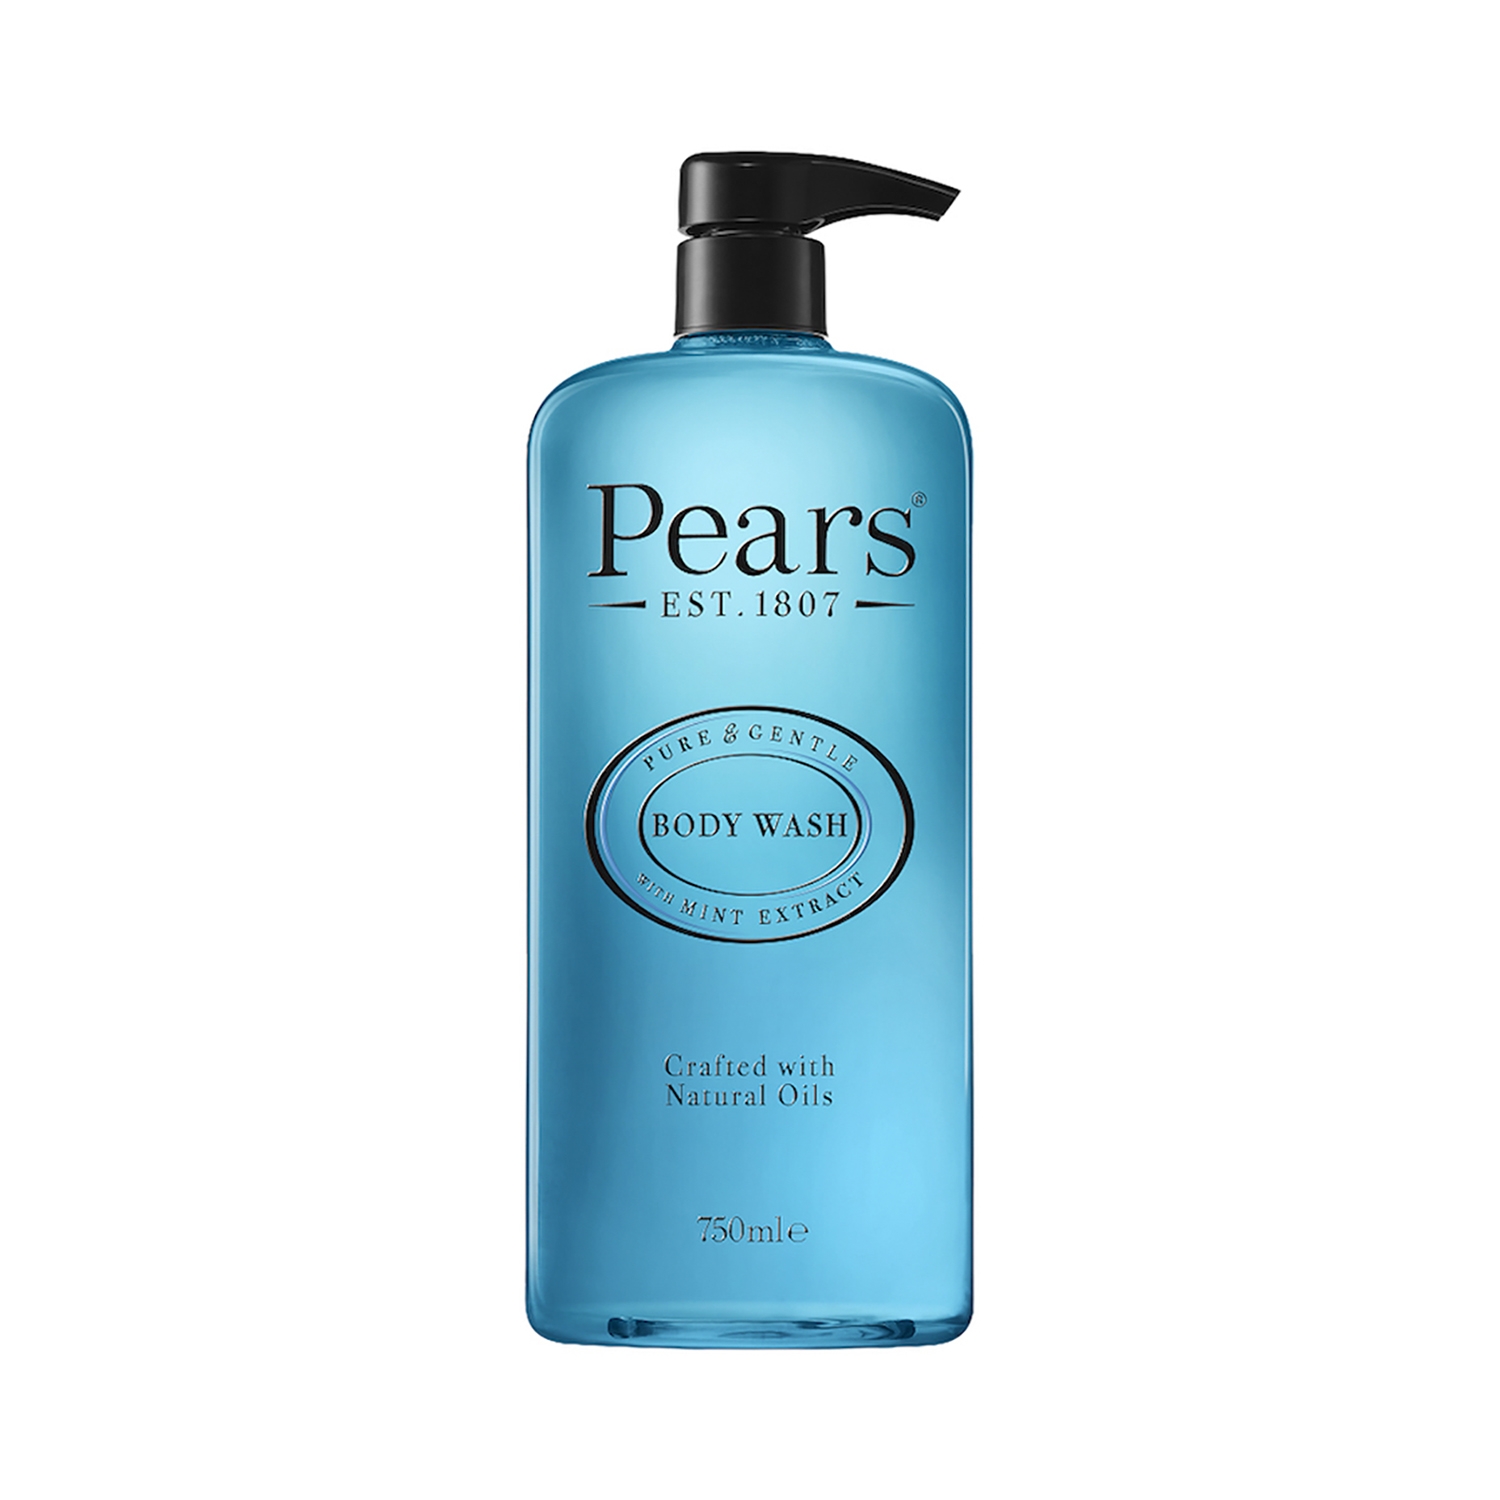 Pears | Pears Pure & Gentle Mint Extracts Body Wash (750ml)